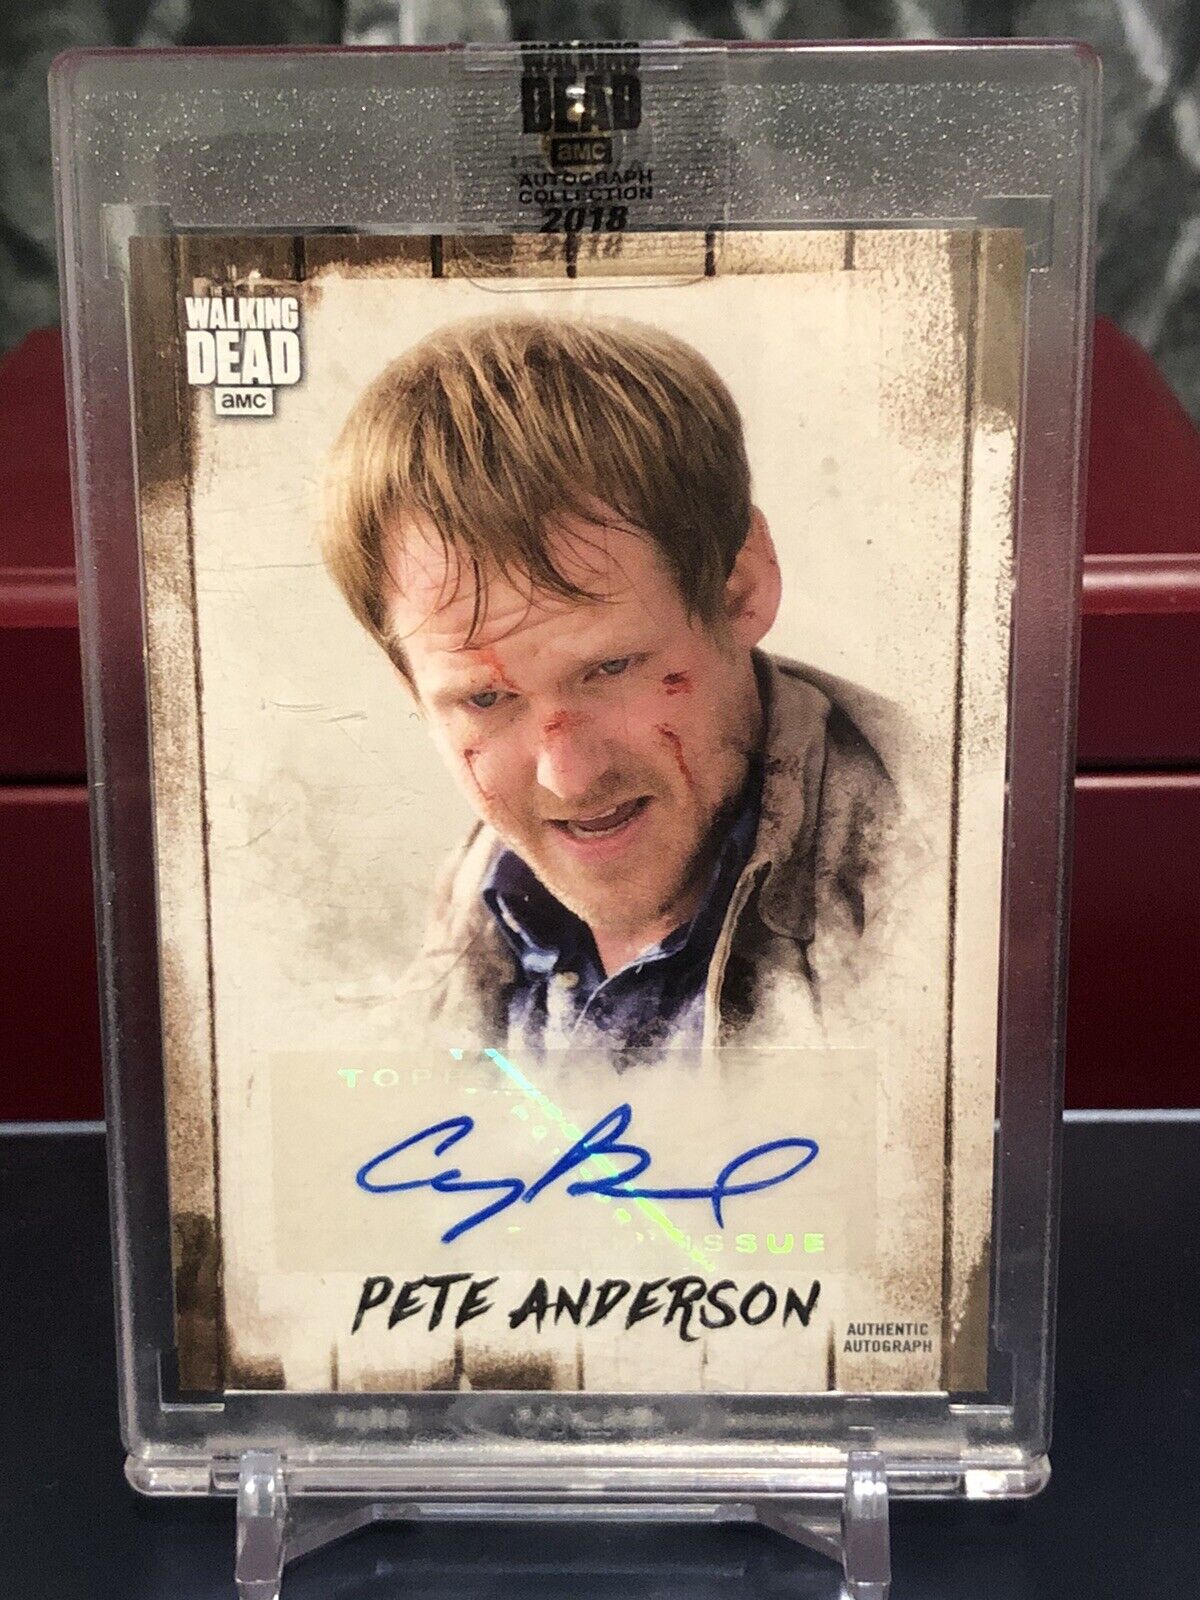 2018 Topps The Walking Dead Autograph Collection Pete Anderson #'d 24/99